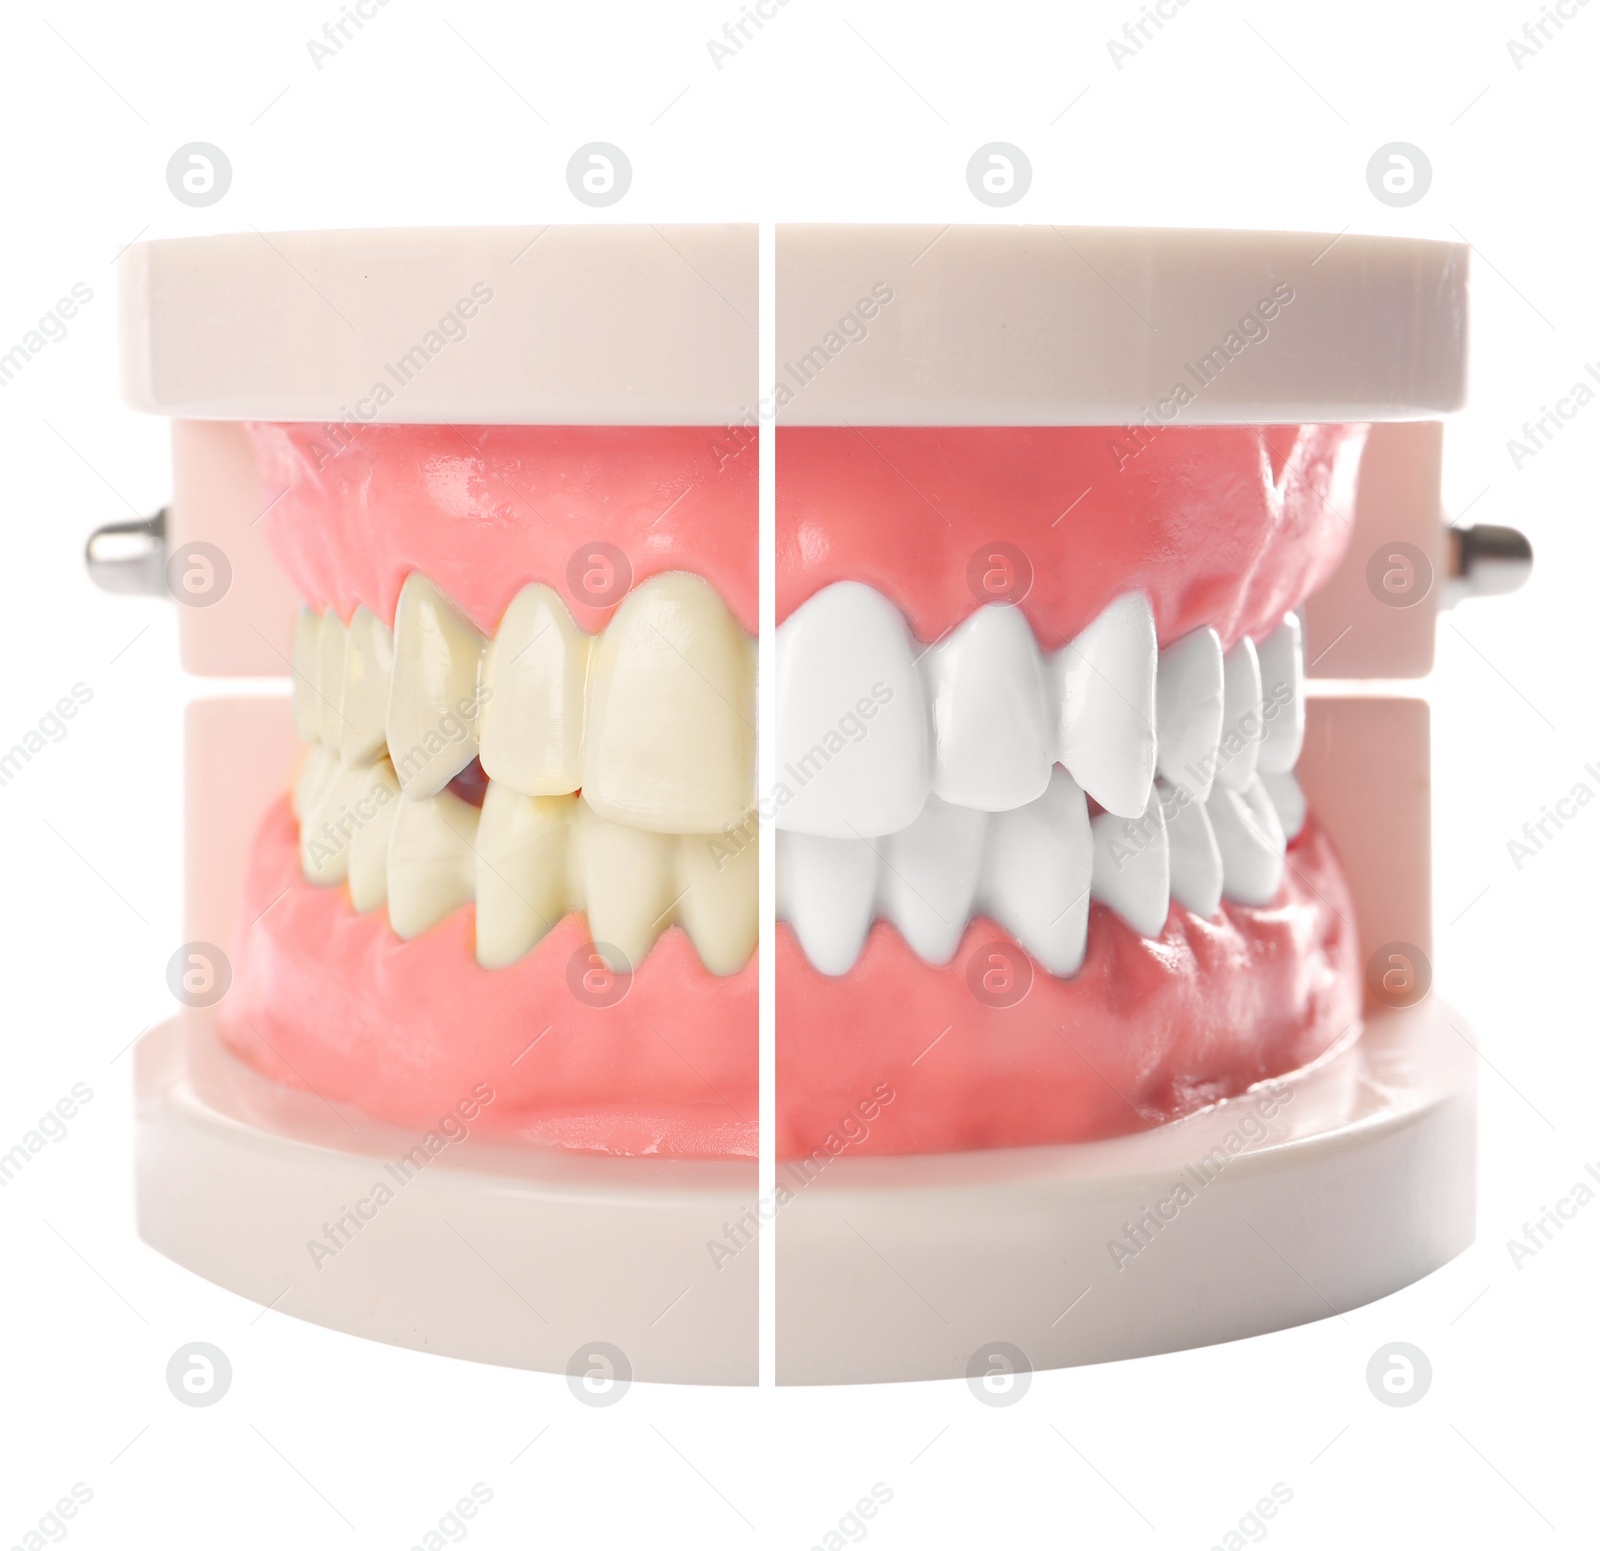 Image of Model of oral cavity with teeth before and after whitening on white background